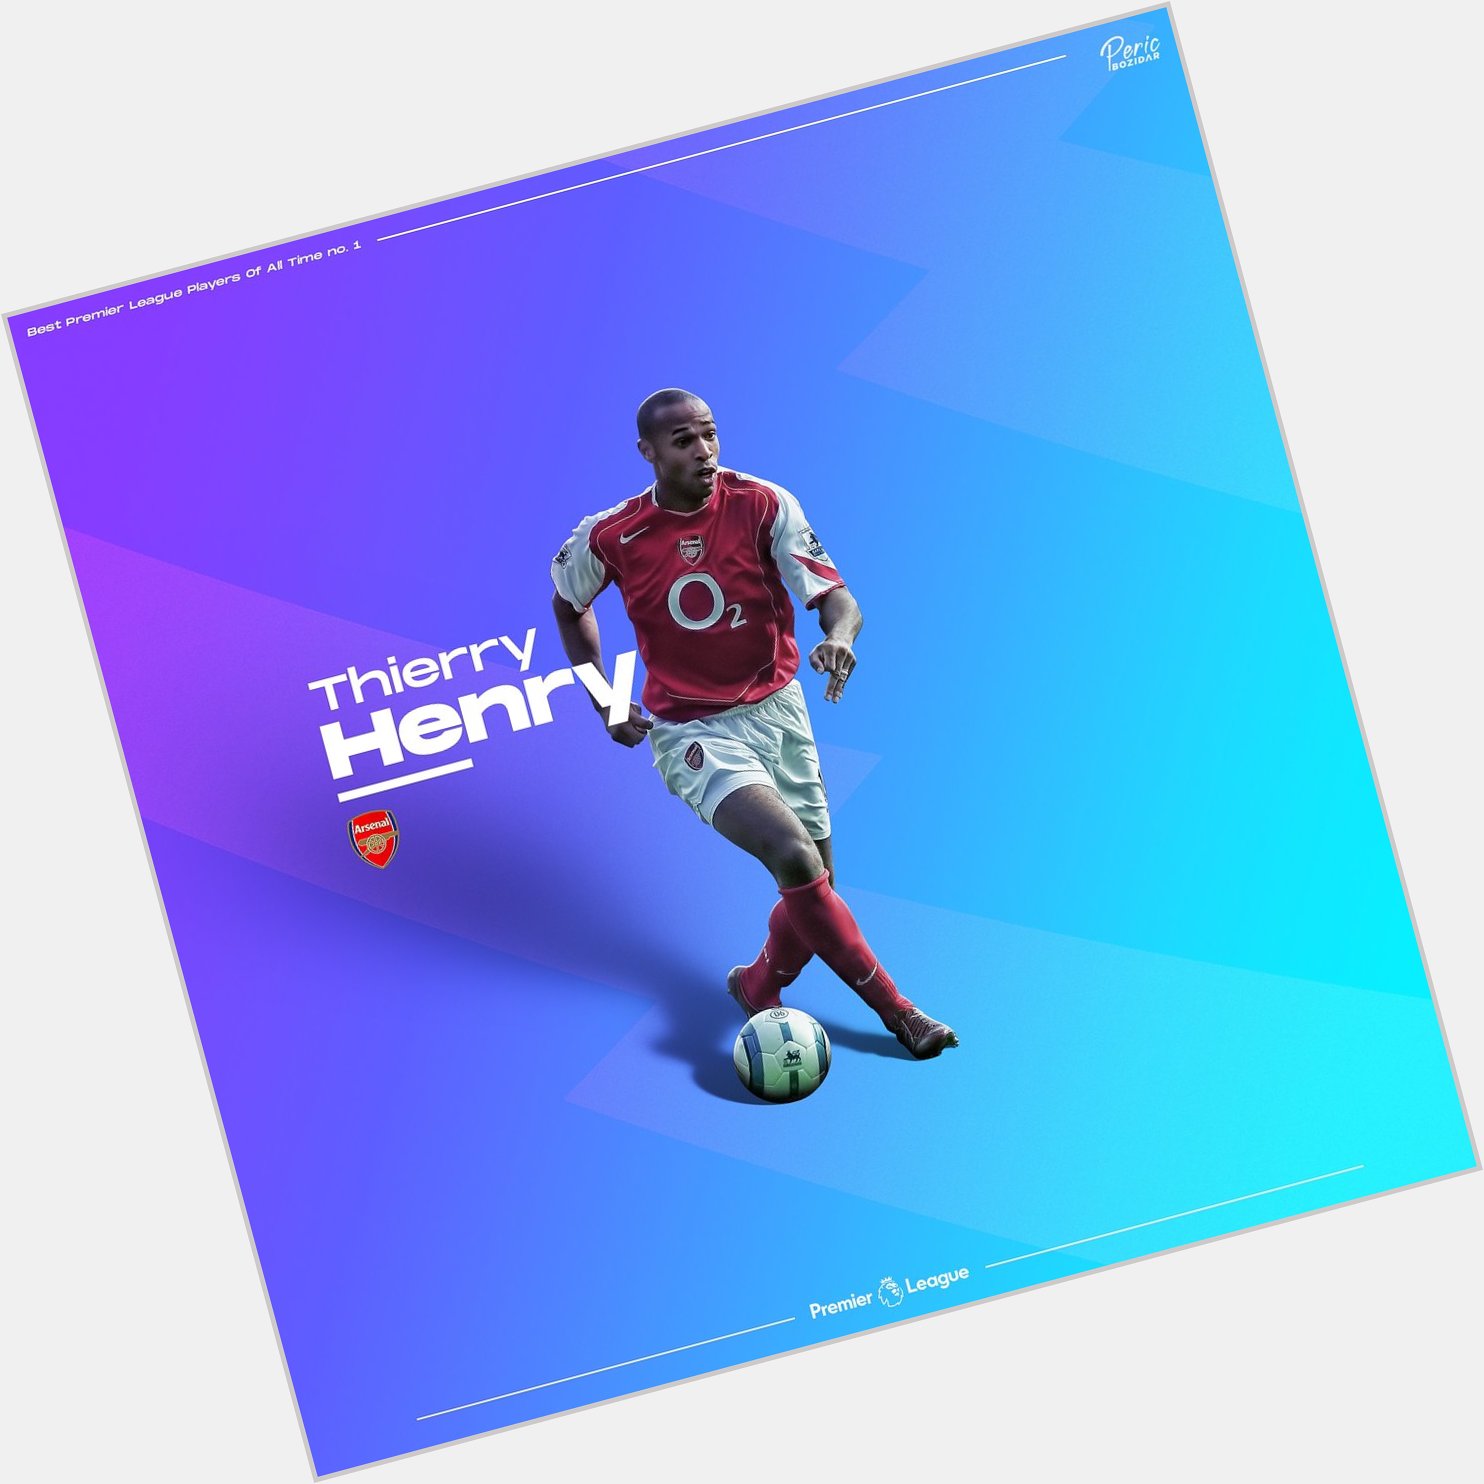 Happy birthday to Thierry Henry - LEGEND 